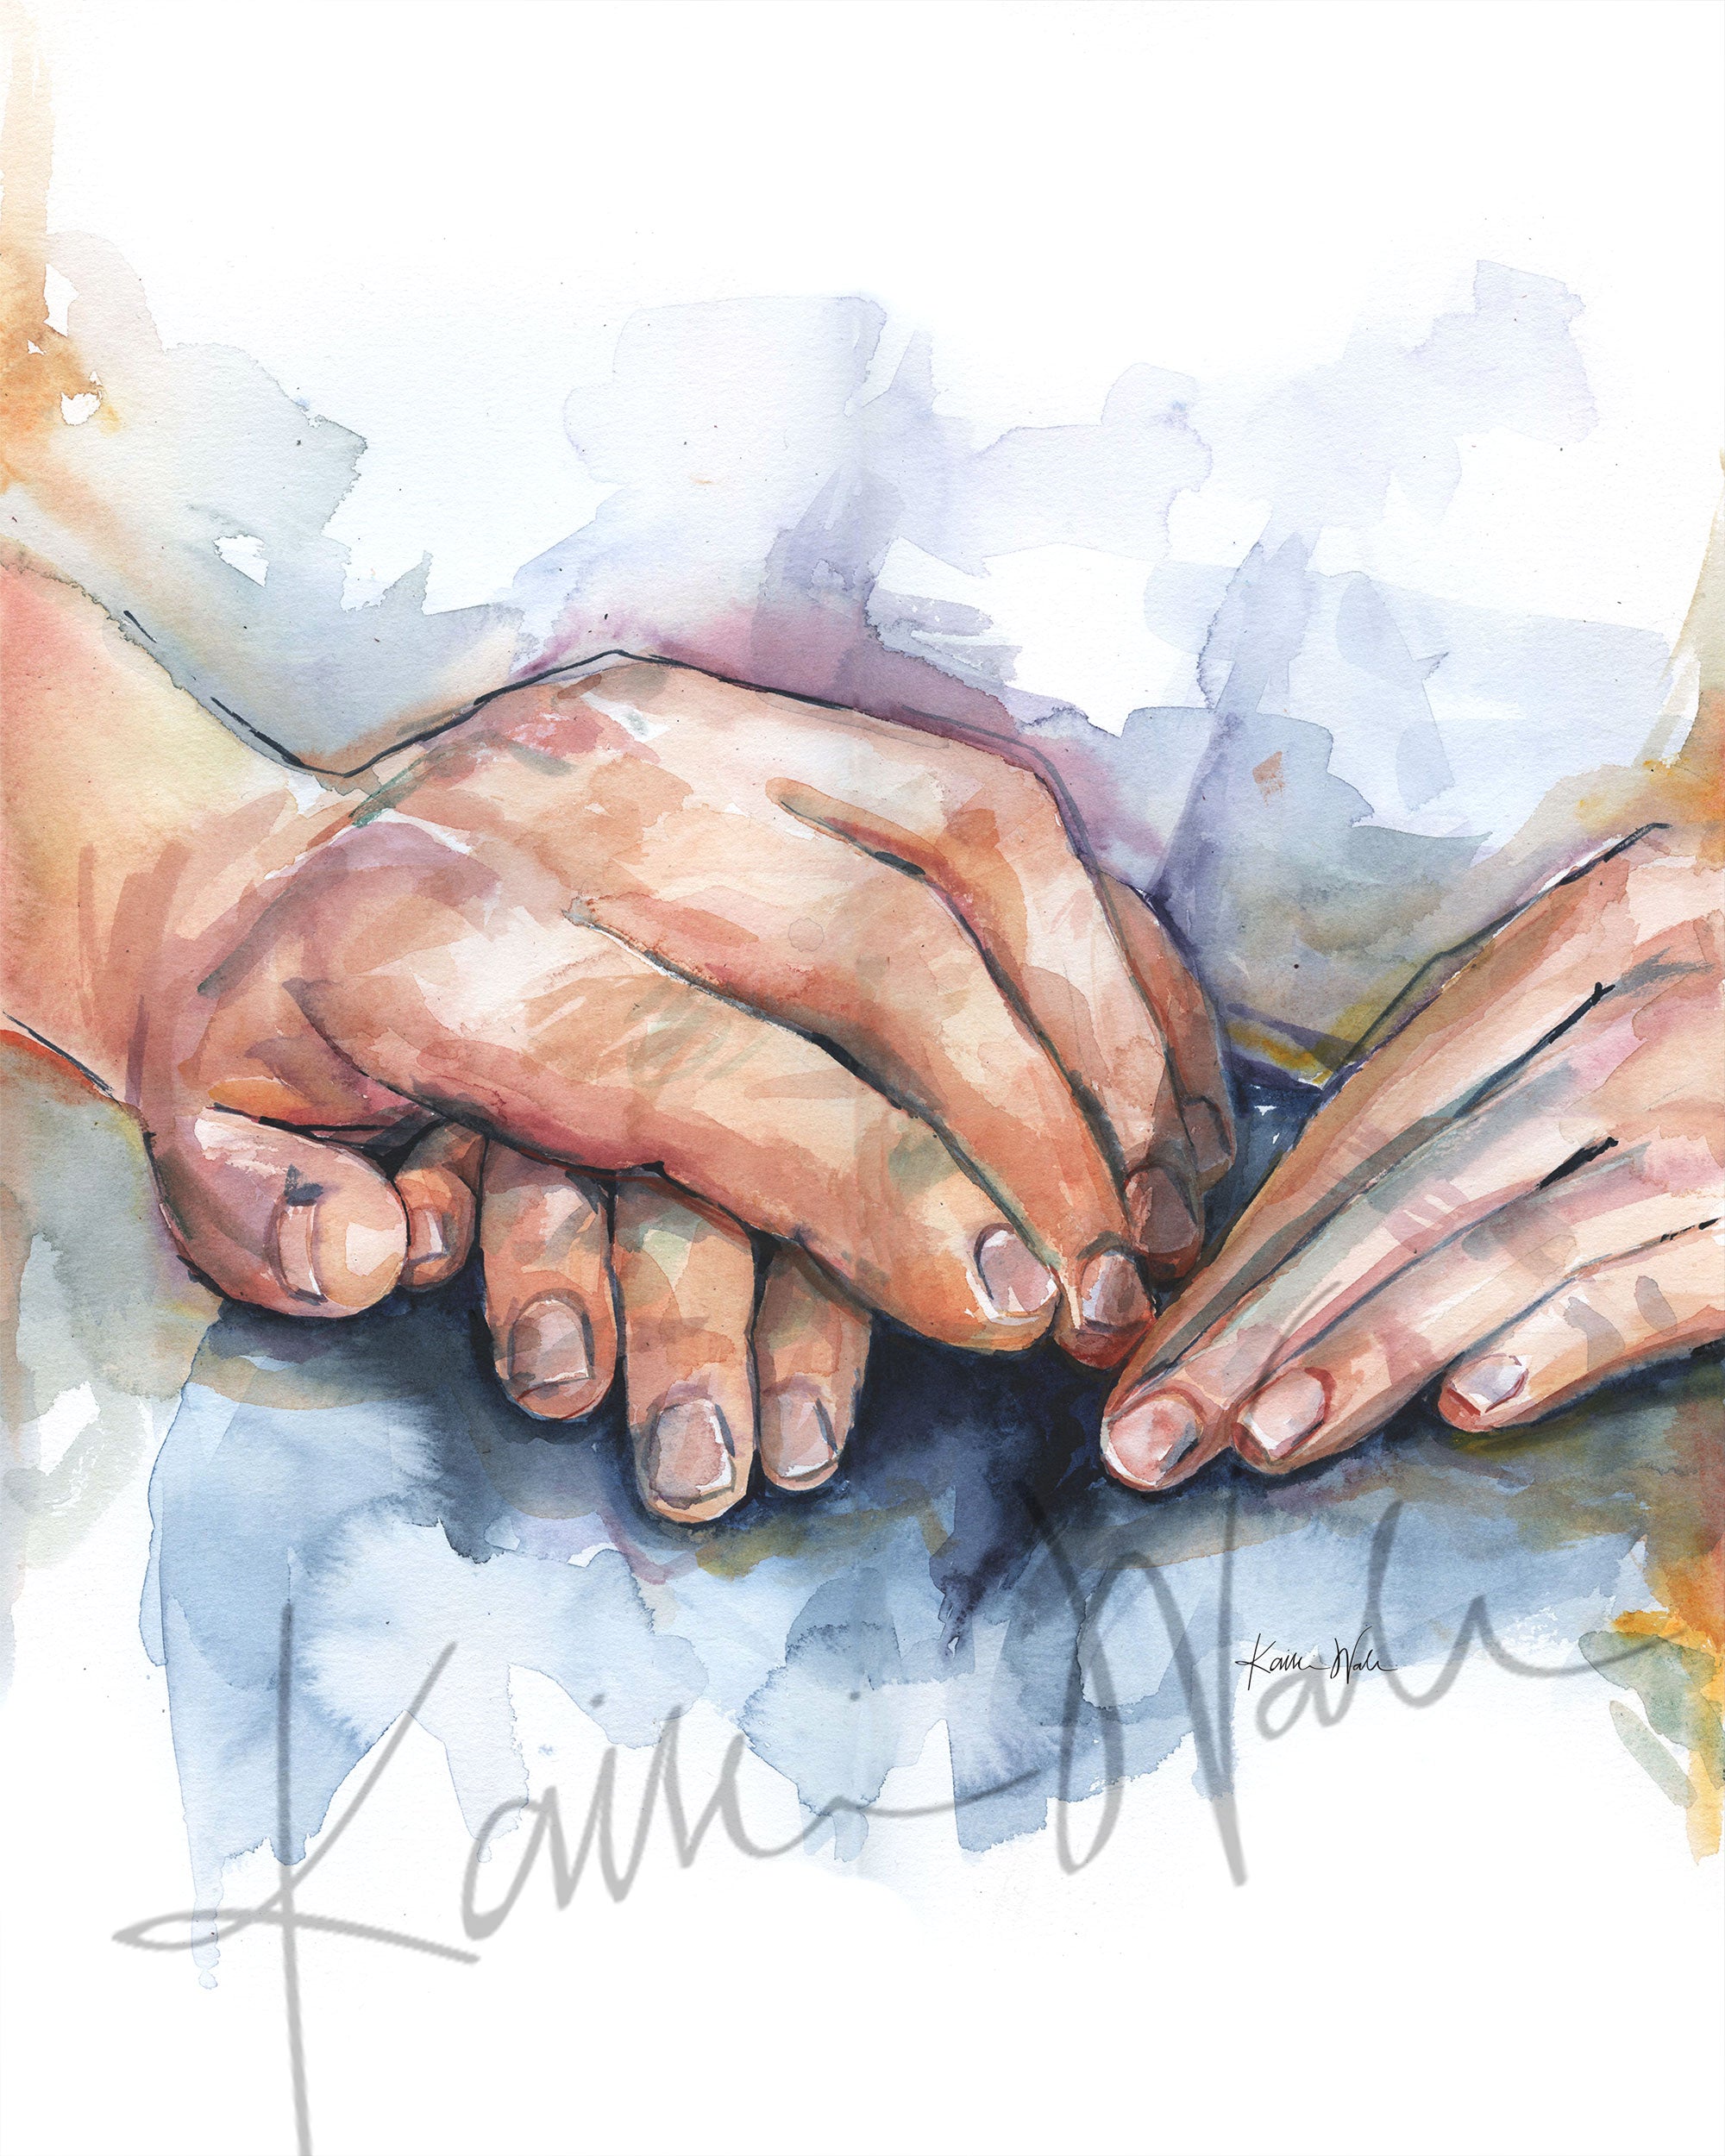 Holding Hands Watercolor Print